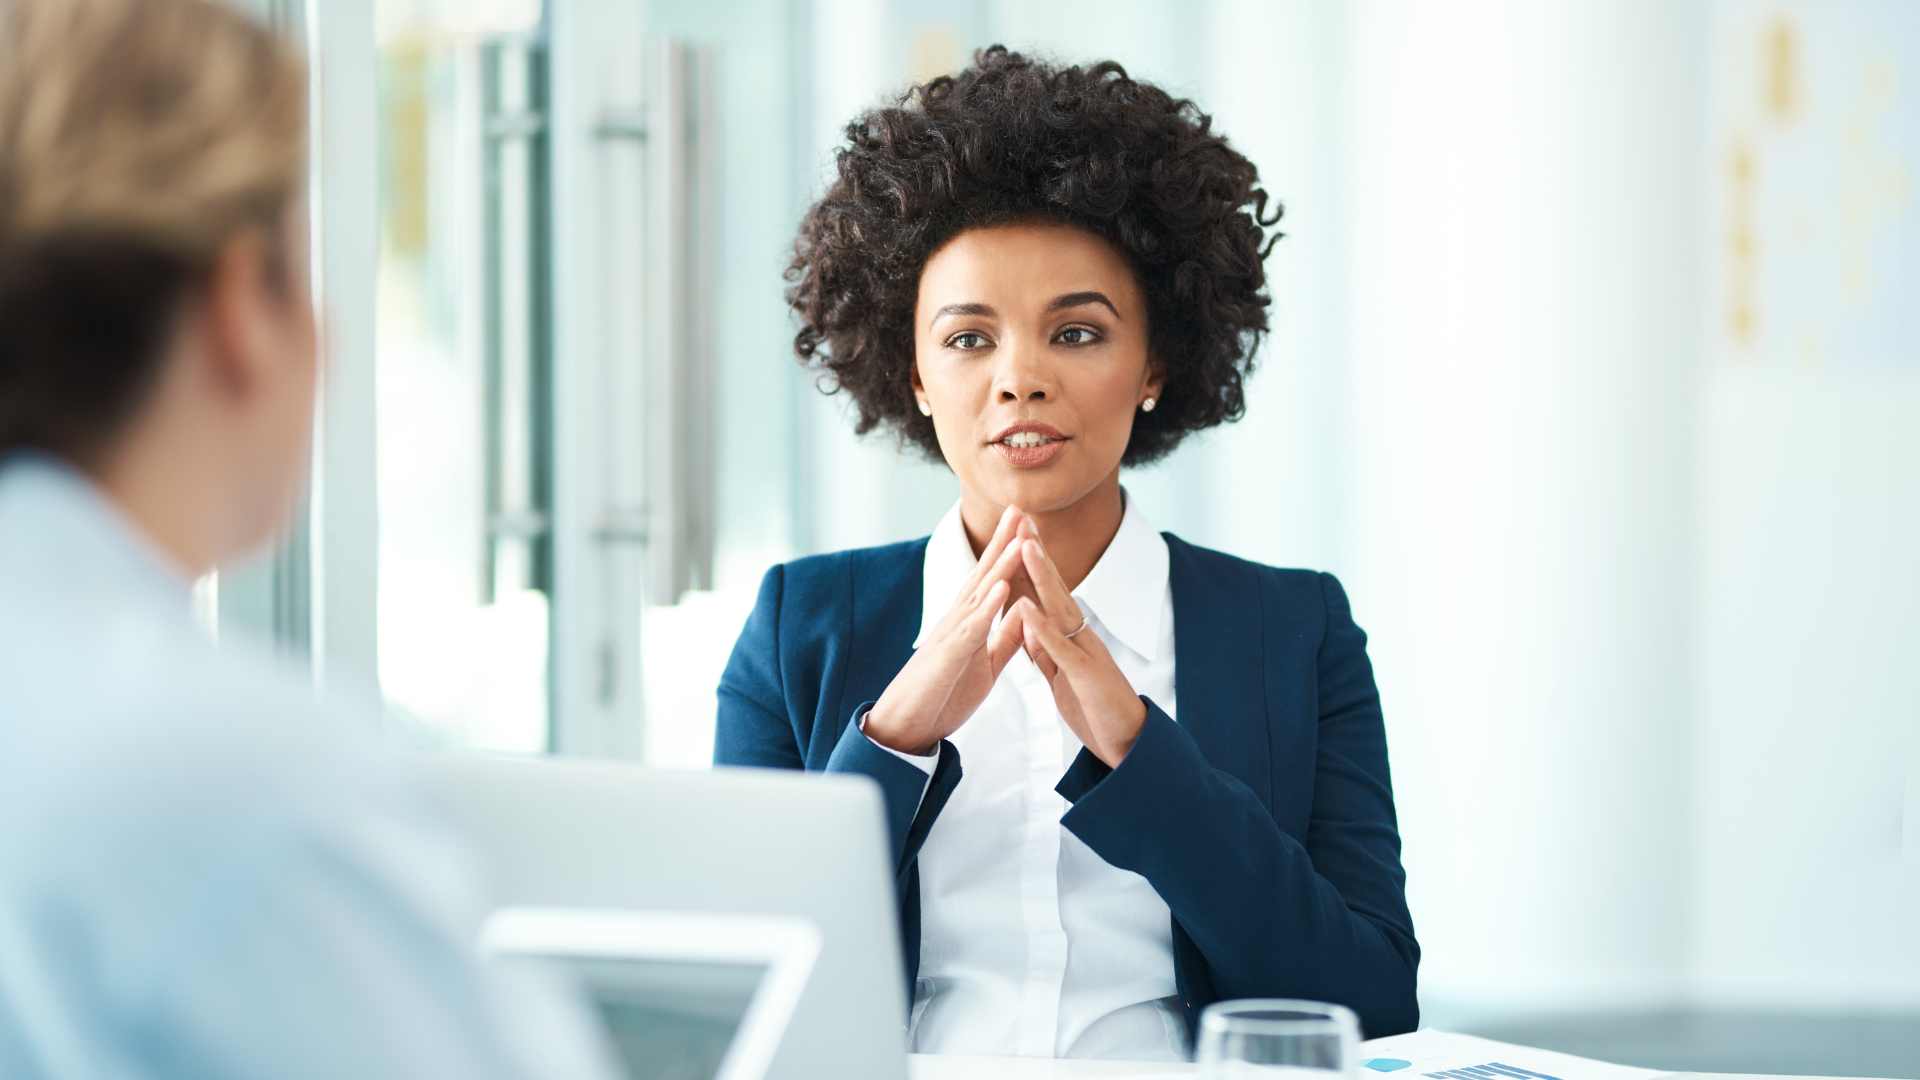 how to say no - a business woman saying no